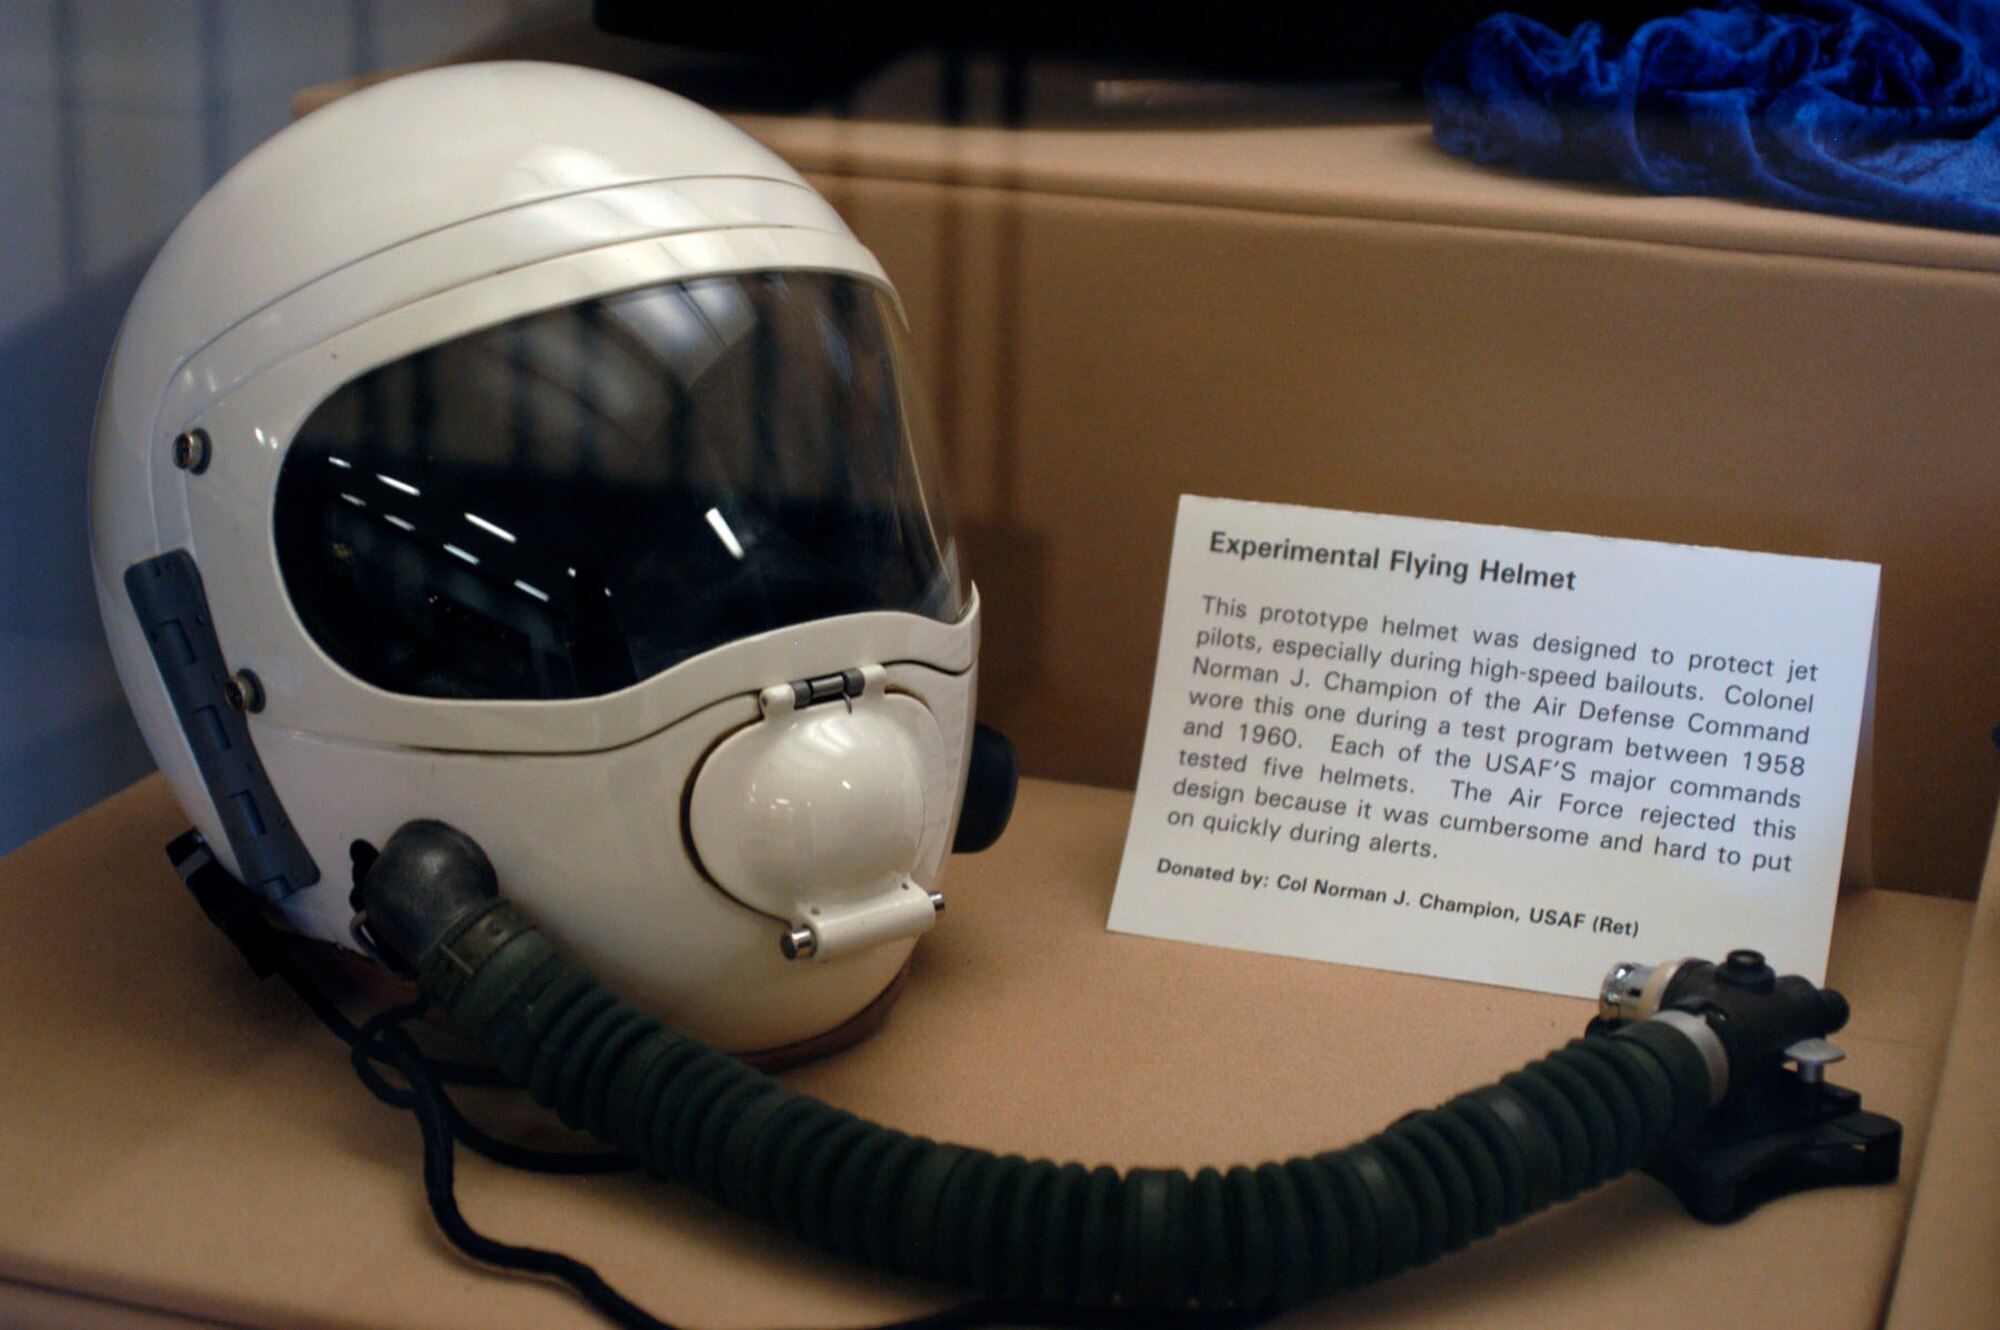 This prototype helmet was designed to protect jet pilots, especially during high-speed bailouts. Col. Norman J. Champion of the Air Defense Command wore this one during a test program between 1958 and 1960. (U.S. Air Force photo)